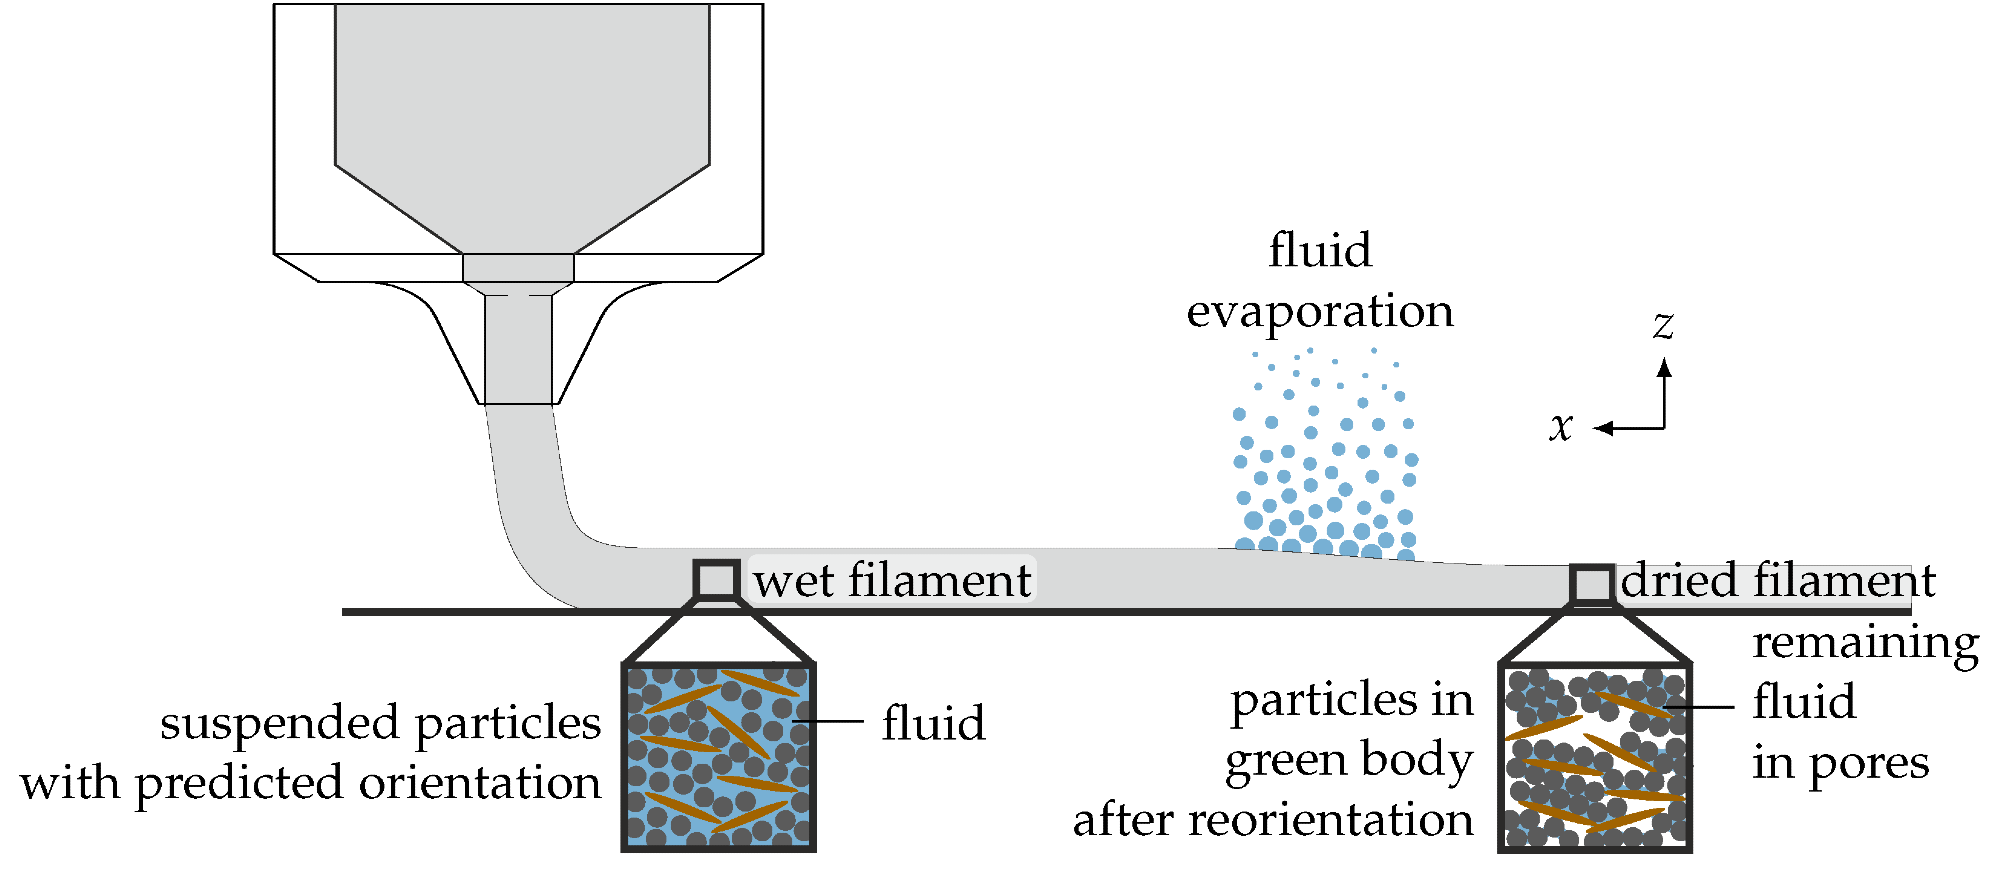 Overview figure of the scope of this work. The figure shows an illustration of the robocasting process that extrudes a ceramic filament. A zoom shows the microstructure in the wet filament that is usually predicted using numerical simulation or analytical models. After printing, the carrier fluid evaporates, during which the particle orientation changes (second microstructure), yielding the microstructure that can be measured in the experiment.